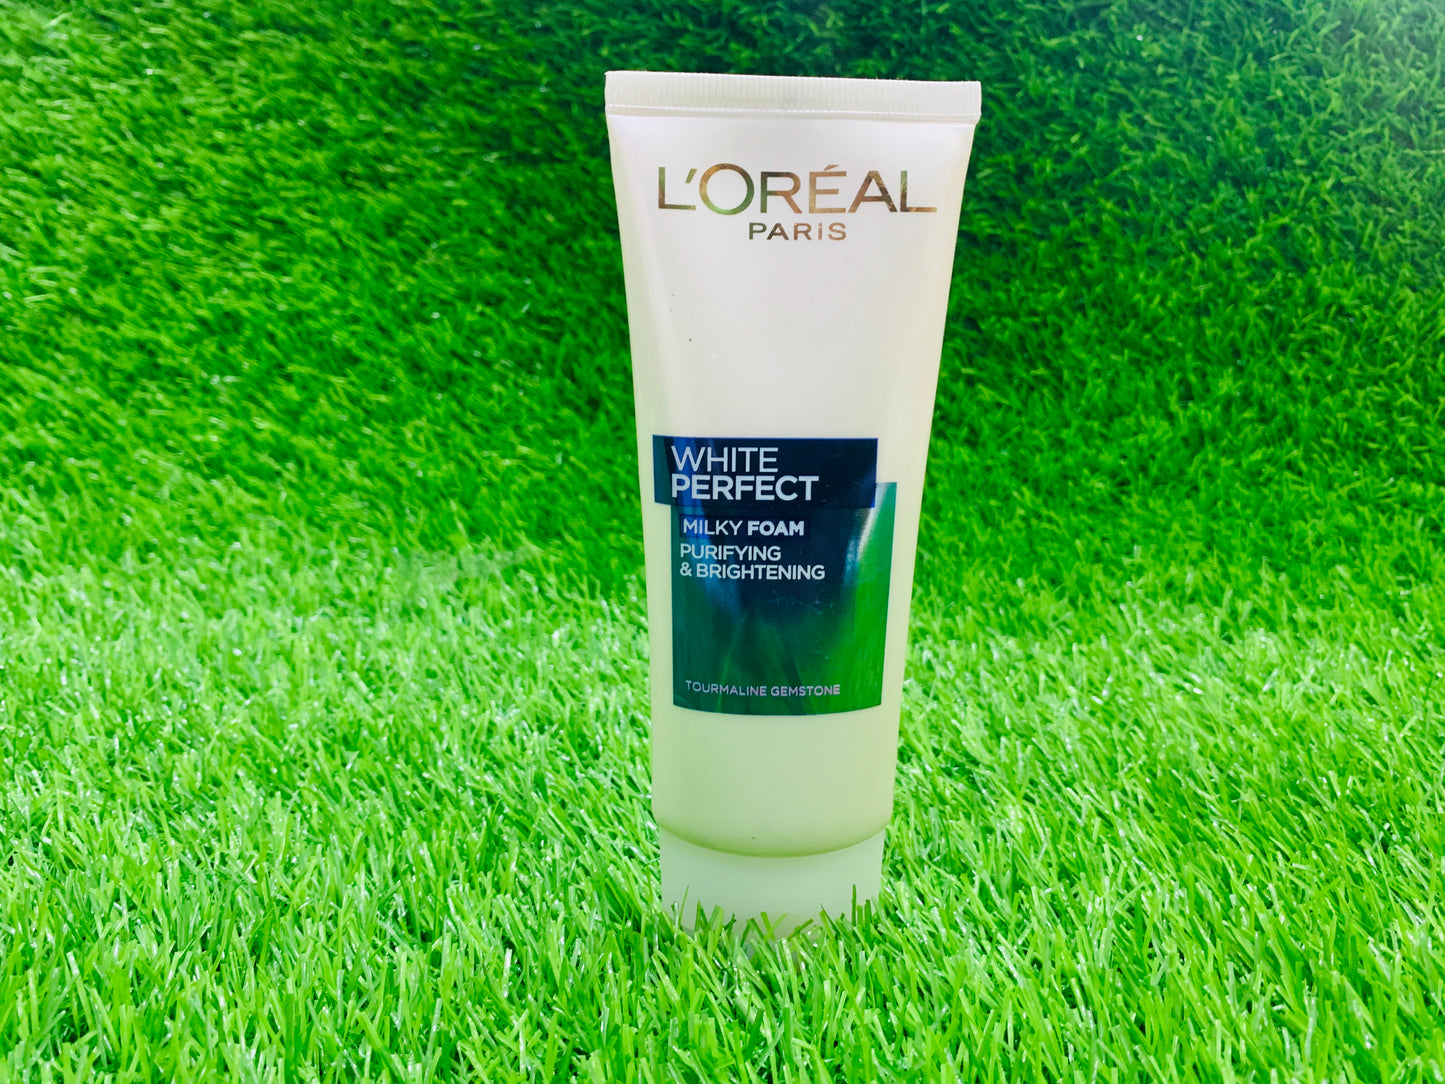 LOREAL WHITE PERFECT FACE WASH 100ML.